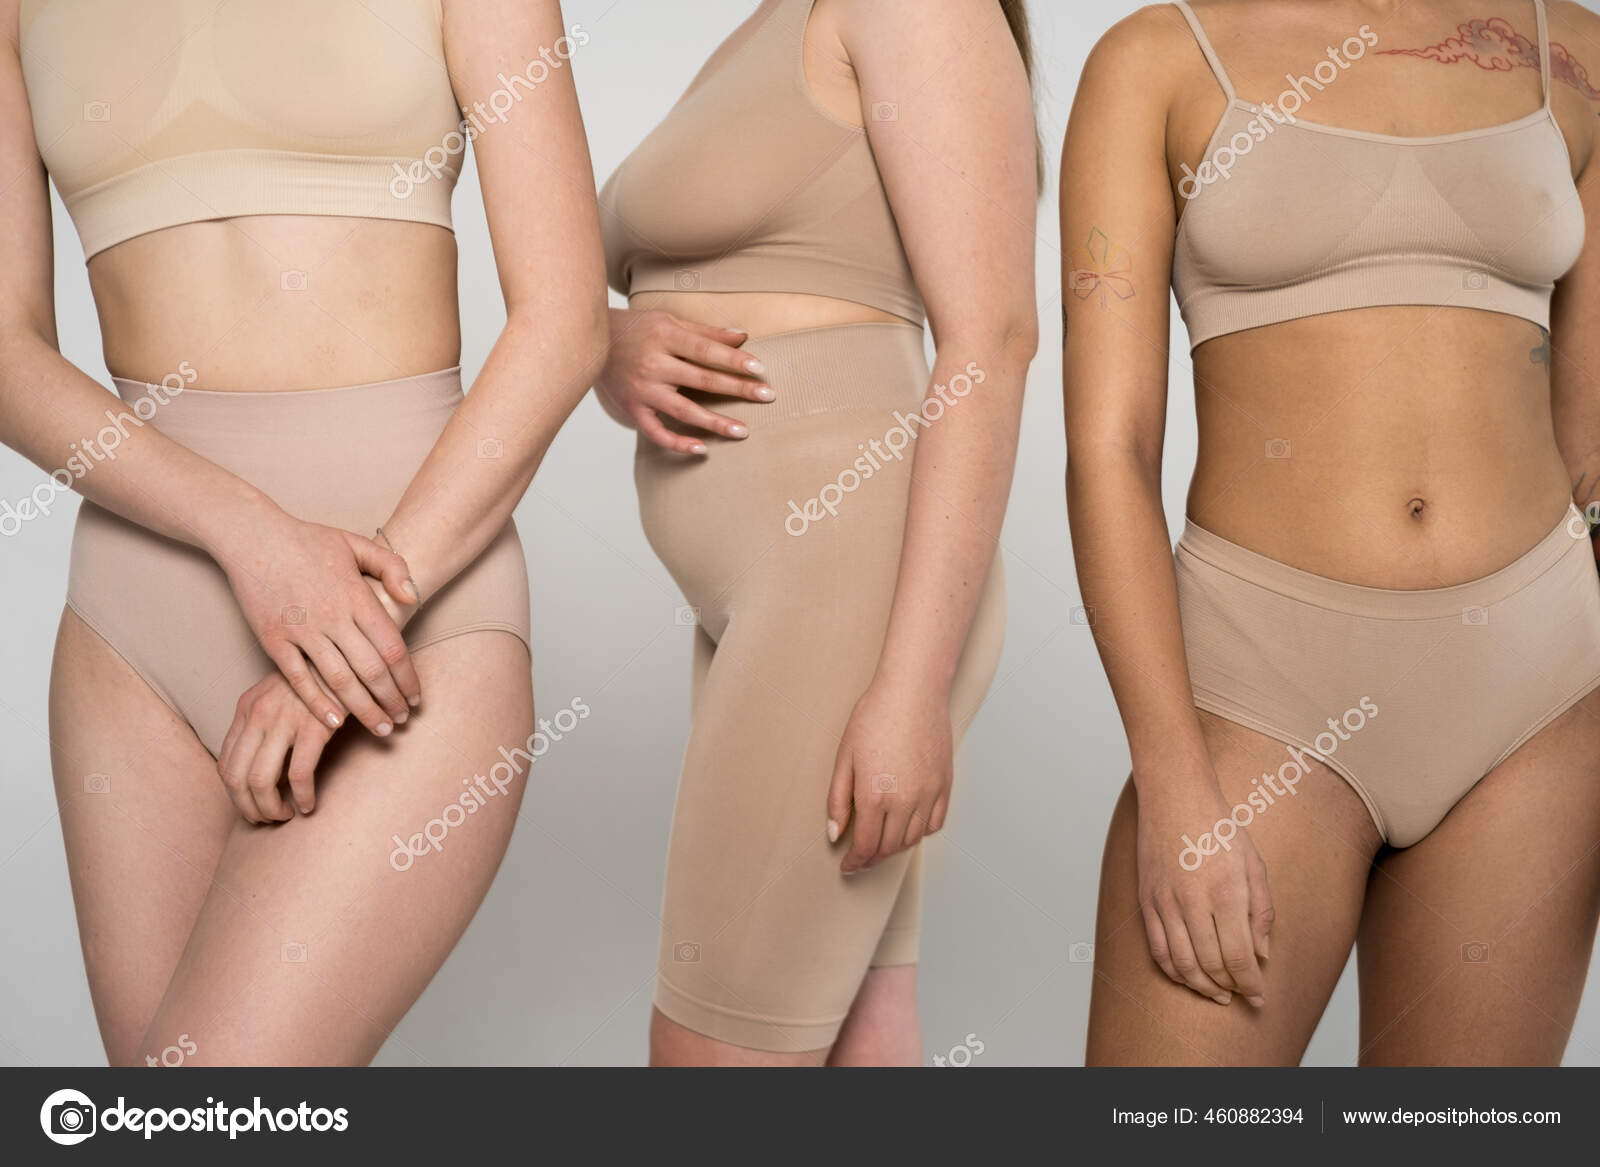 Three girls with different bodies posing in underwear in front of